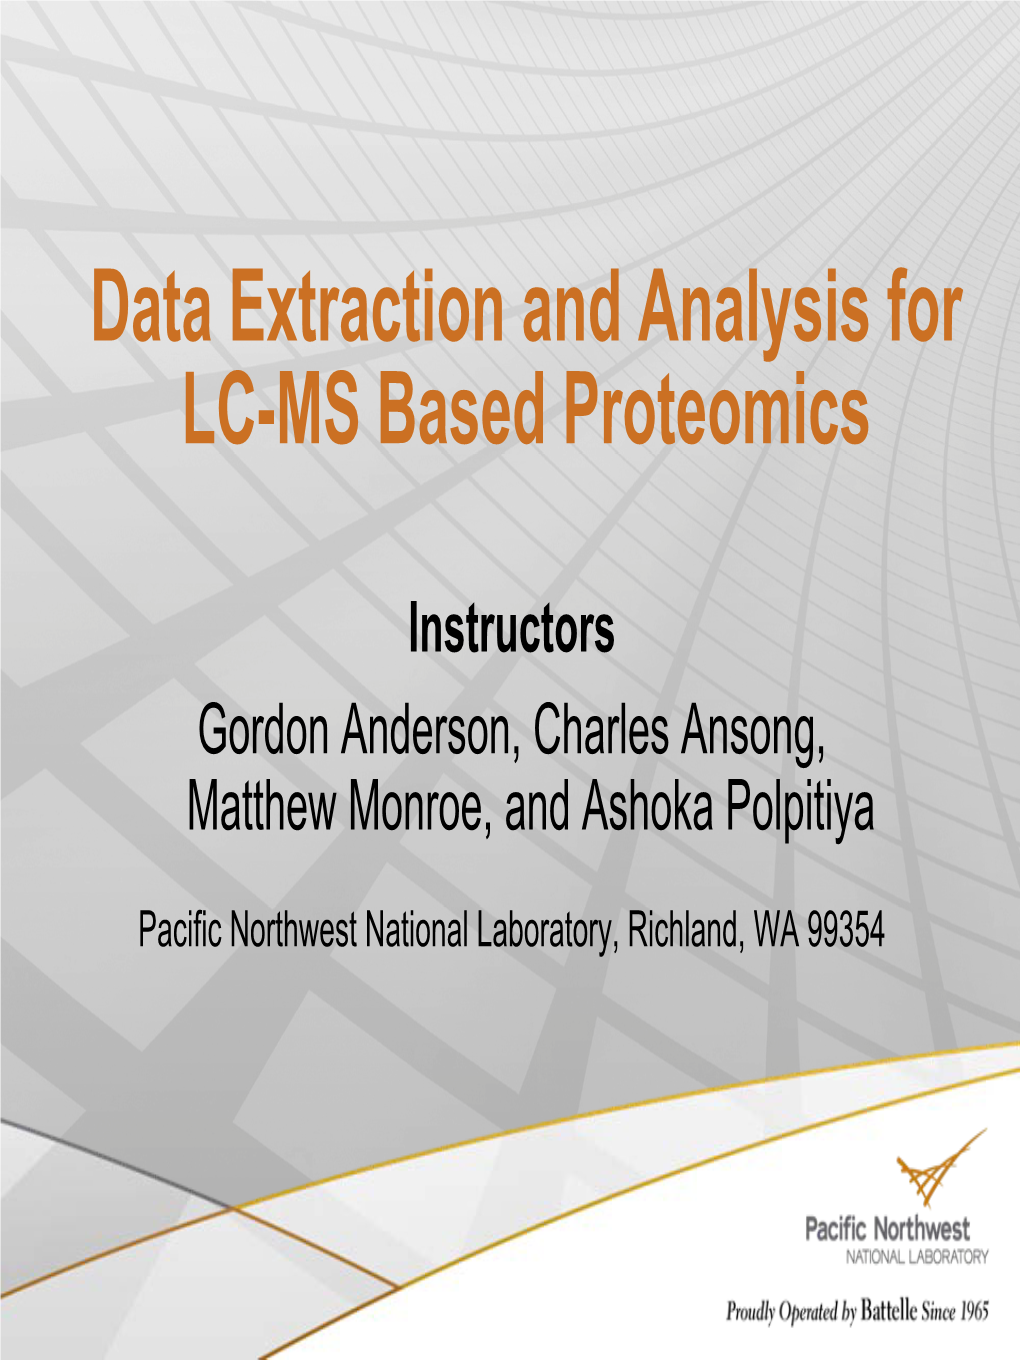 Data Extraction and Analysis for LC-MS Based Proteomics